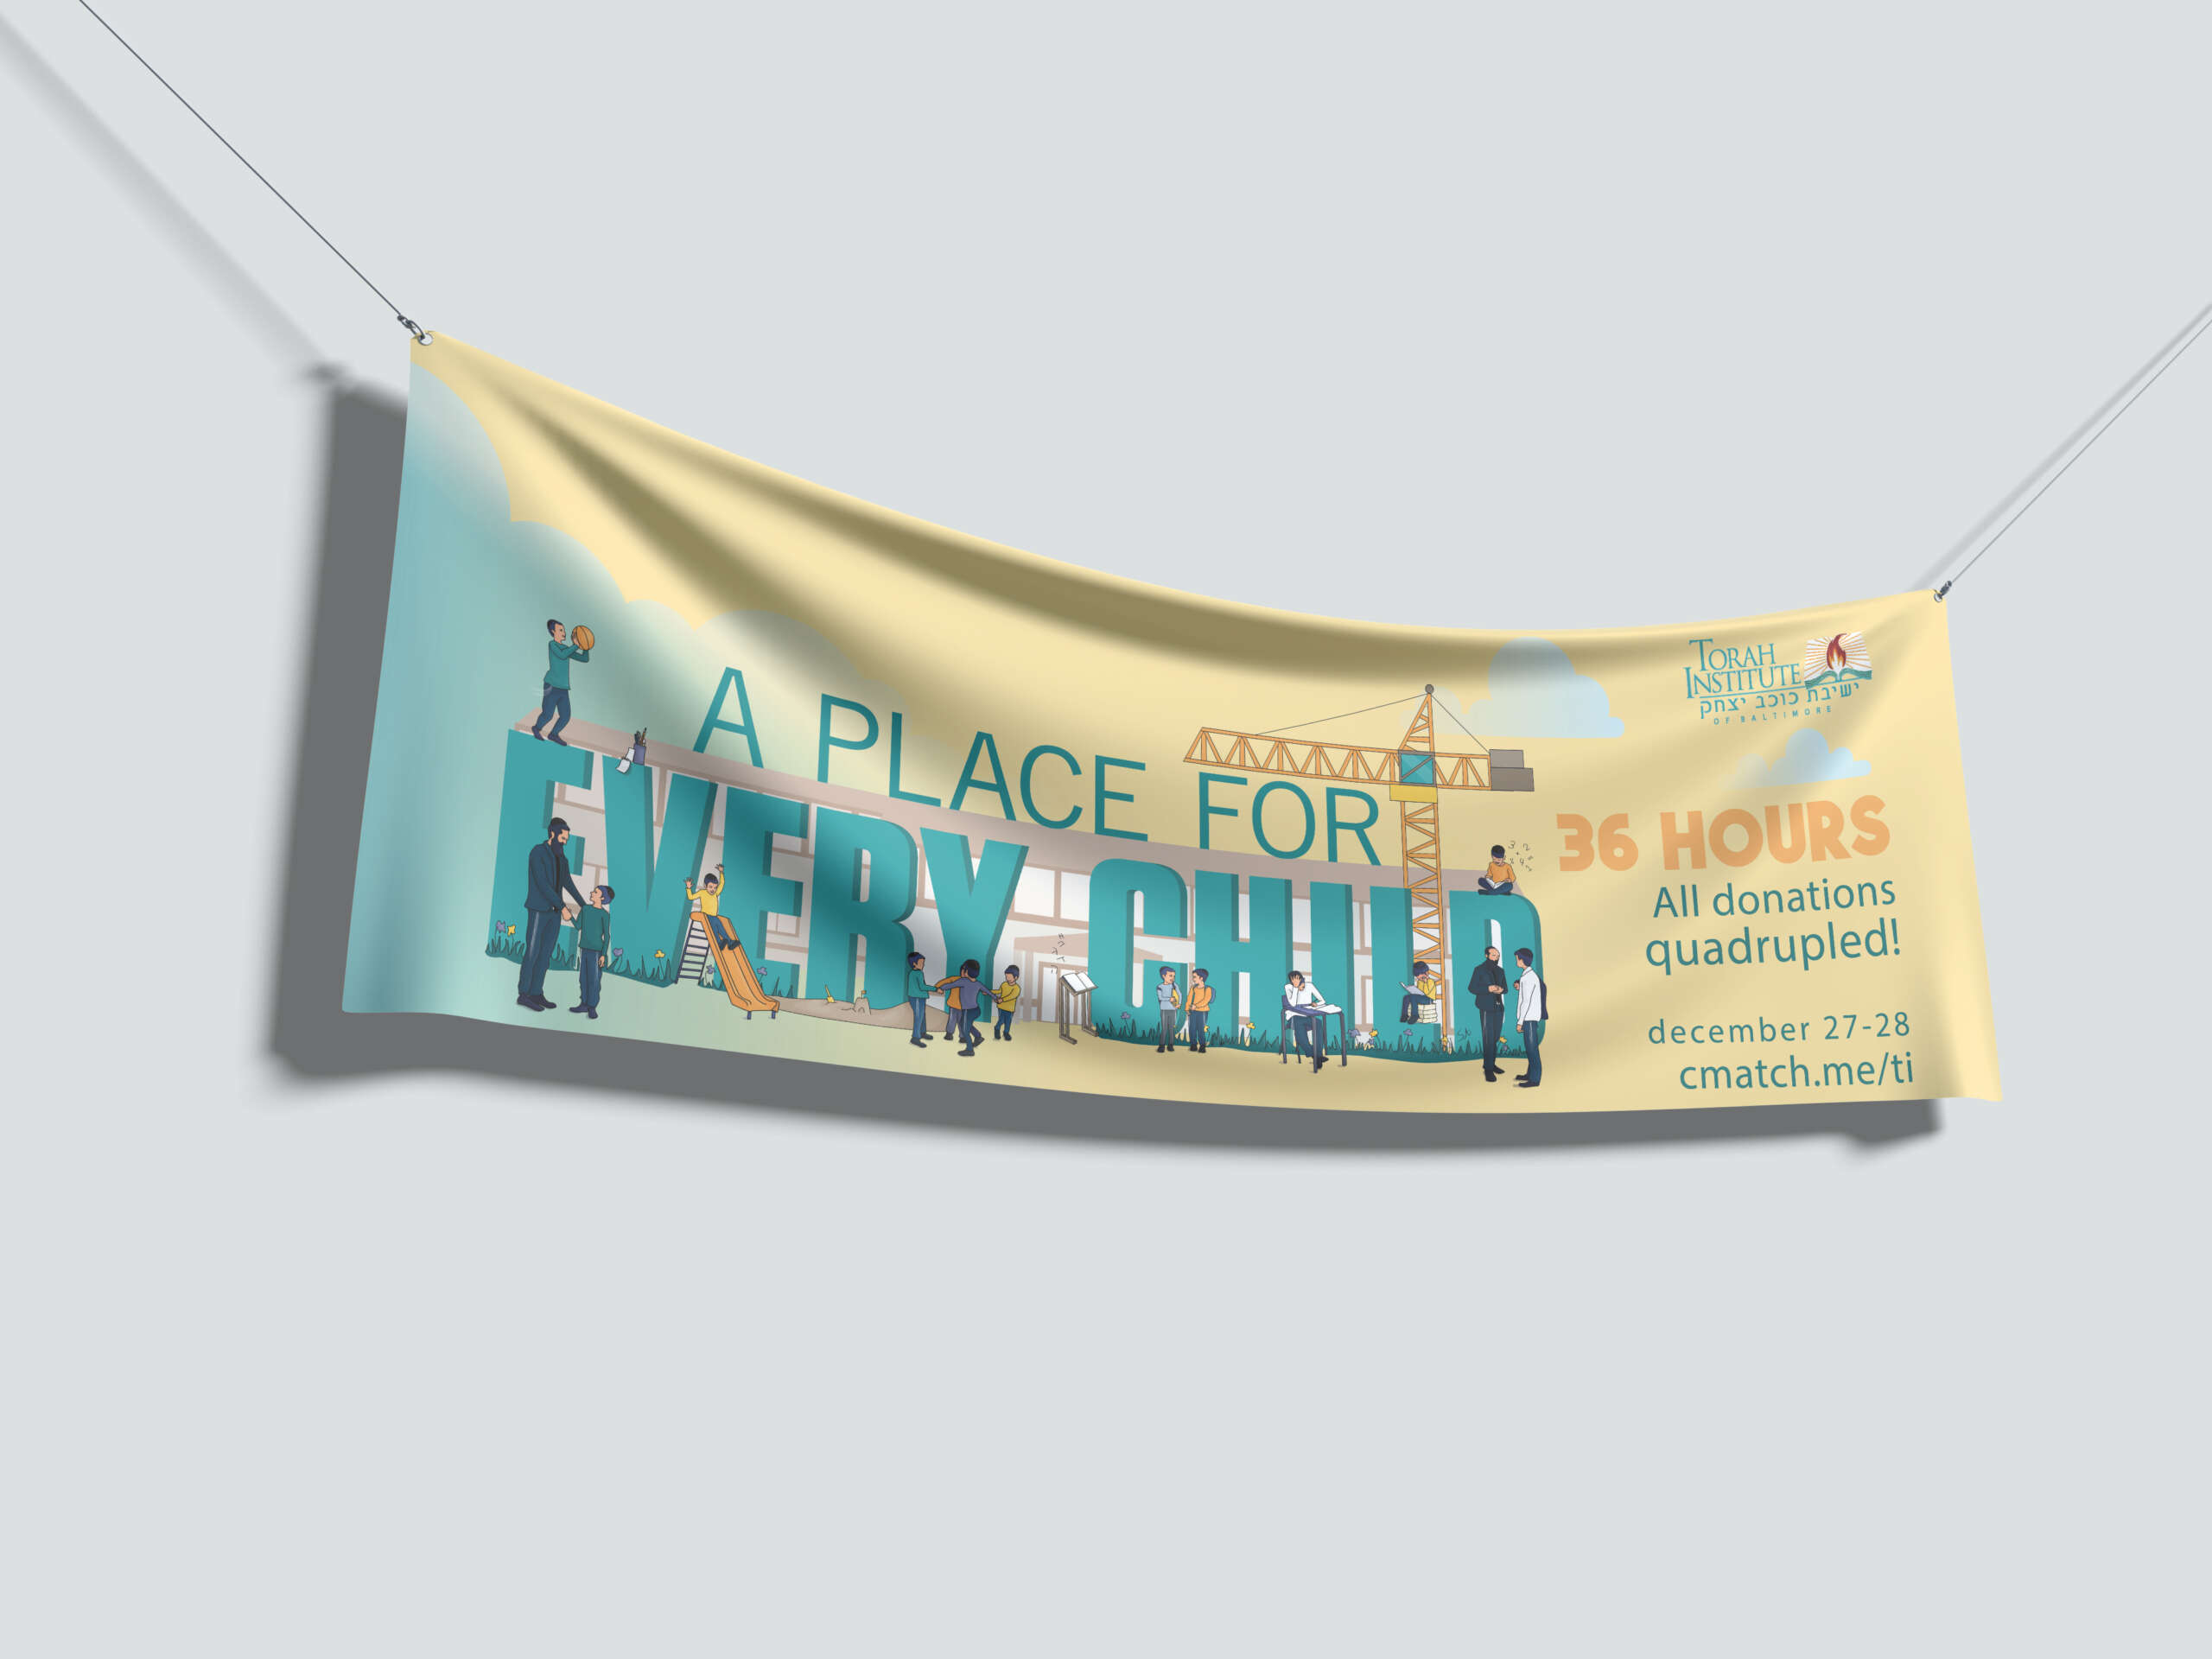 Torah Institute's A Place for Every Child Campaign banner